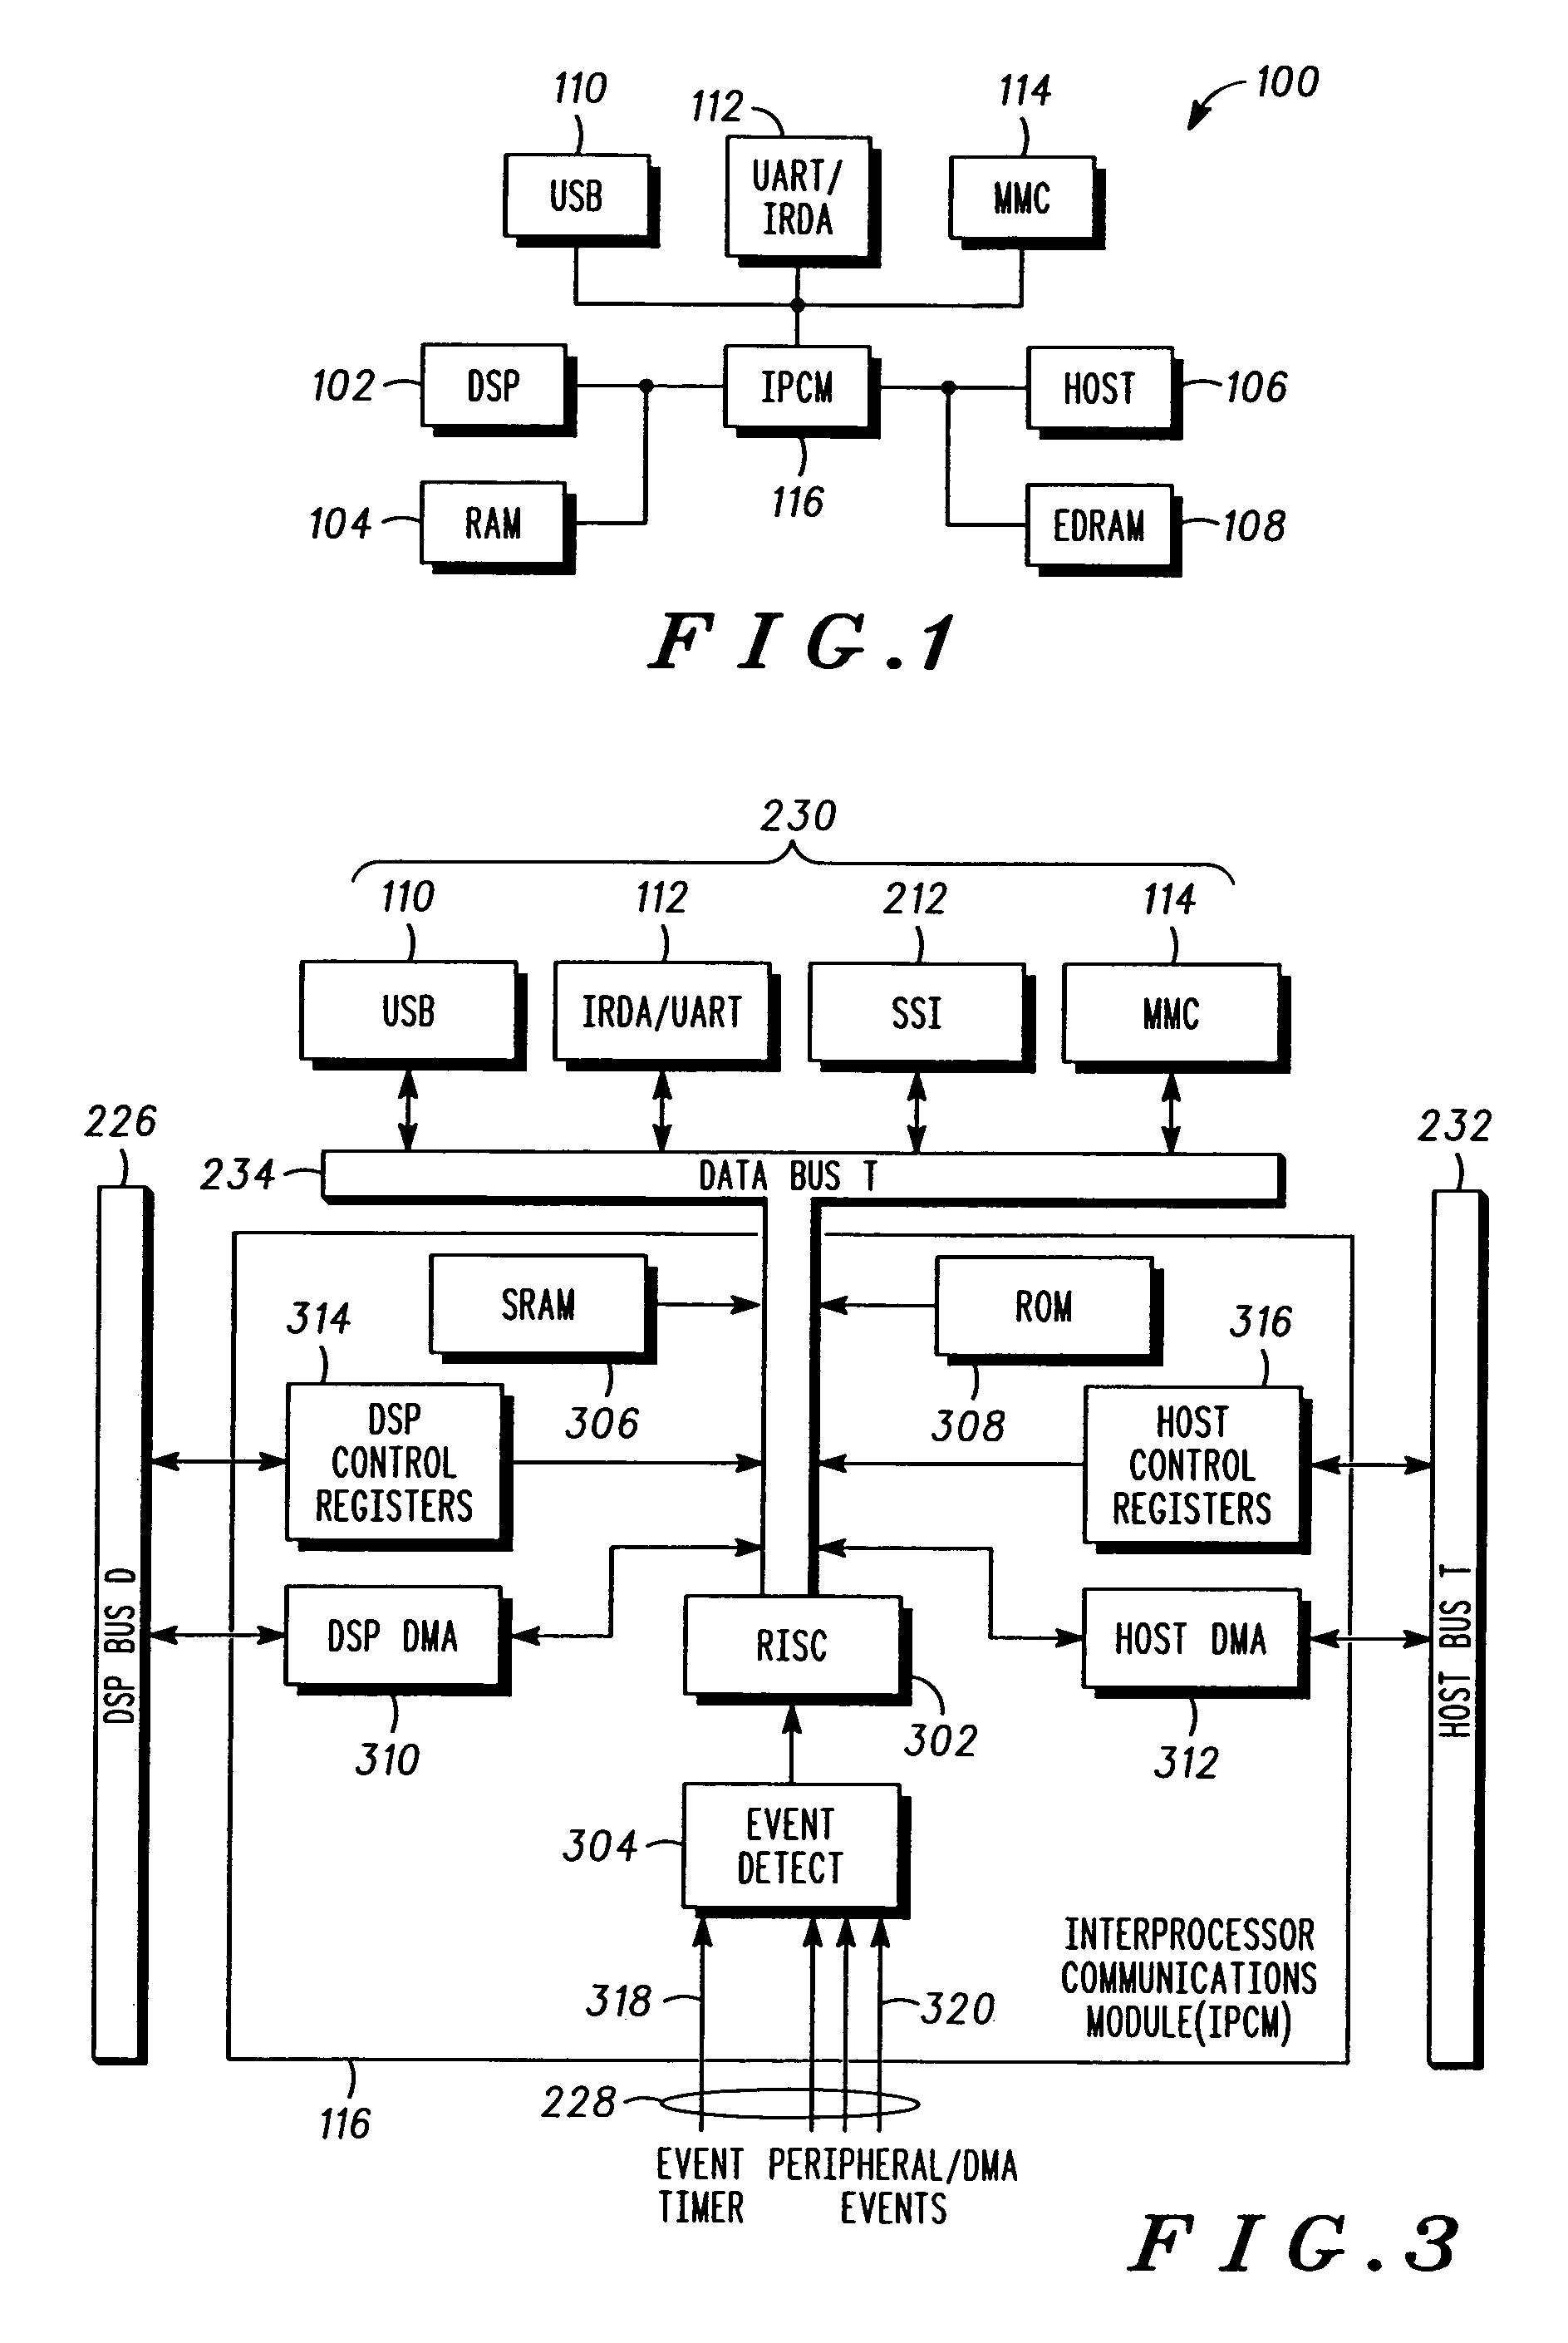 Integrated processor platform supporting wireless handheld multi-media devices